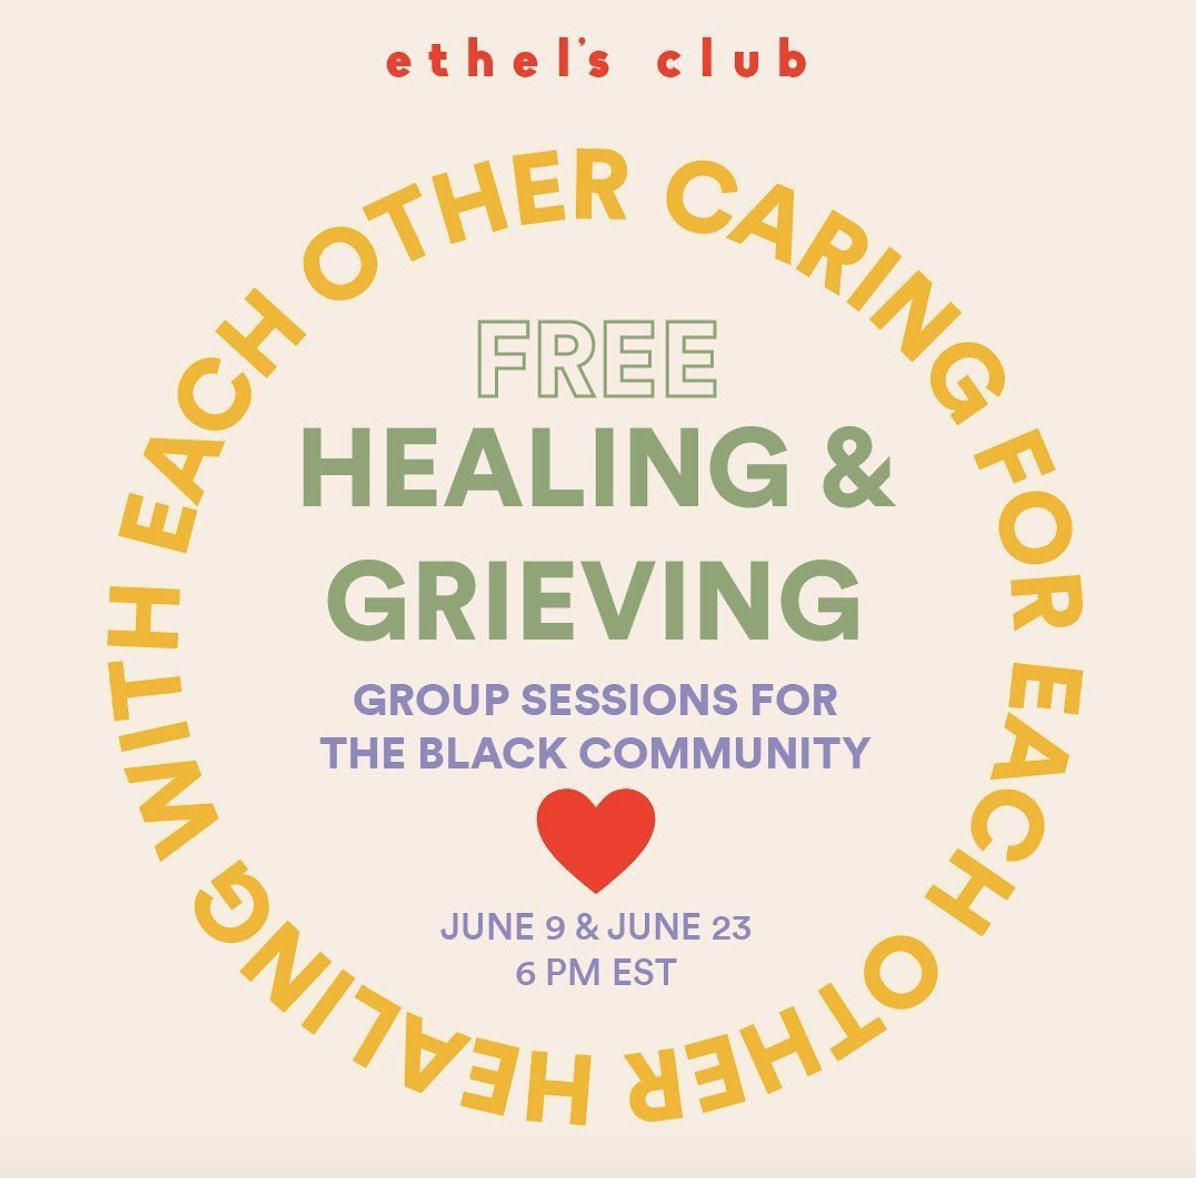 . @ethelsclub is an online social and wellness club dedicated to celebrating people of color. In June, the organization is hosting free virtual group healing and grieving sessions for Black people around the world  https://bit.ly/3dm6gfV 